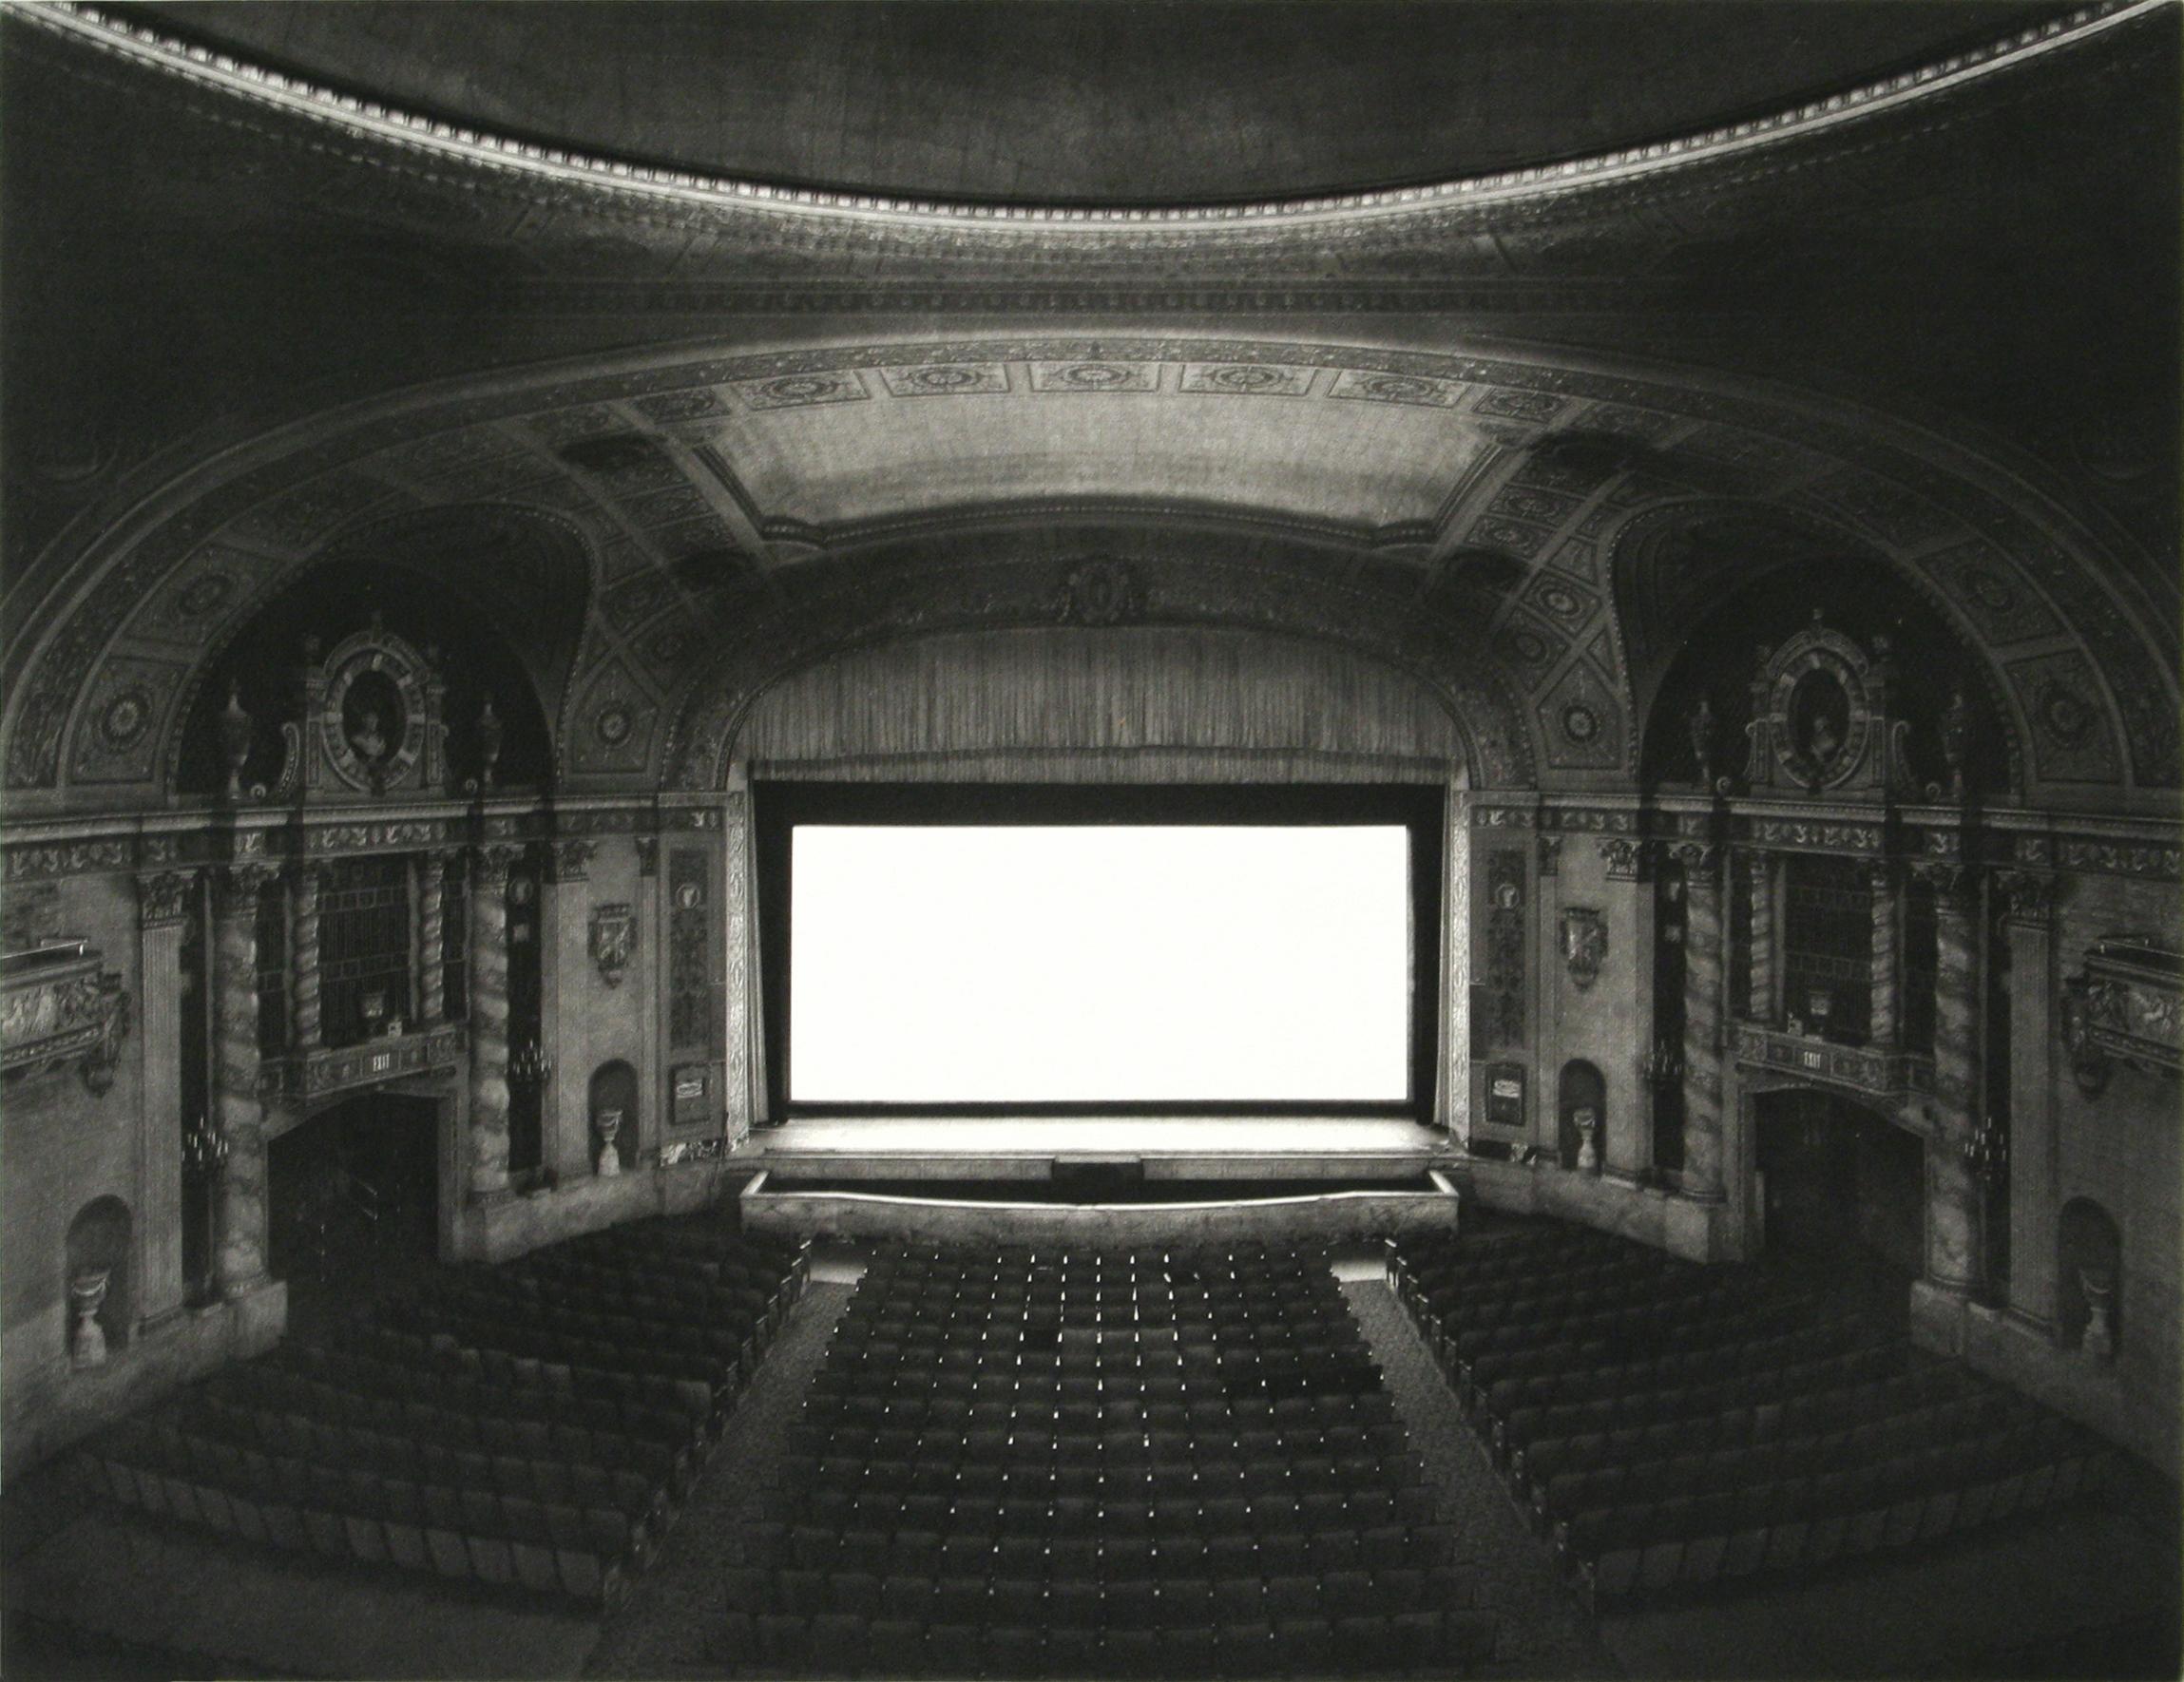 Theaters by Hans Belting, 2001 - Photograph by Hiroshi Sugimoto